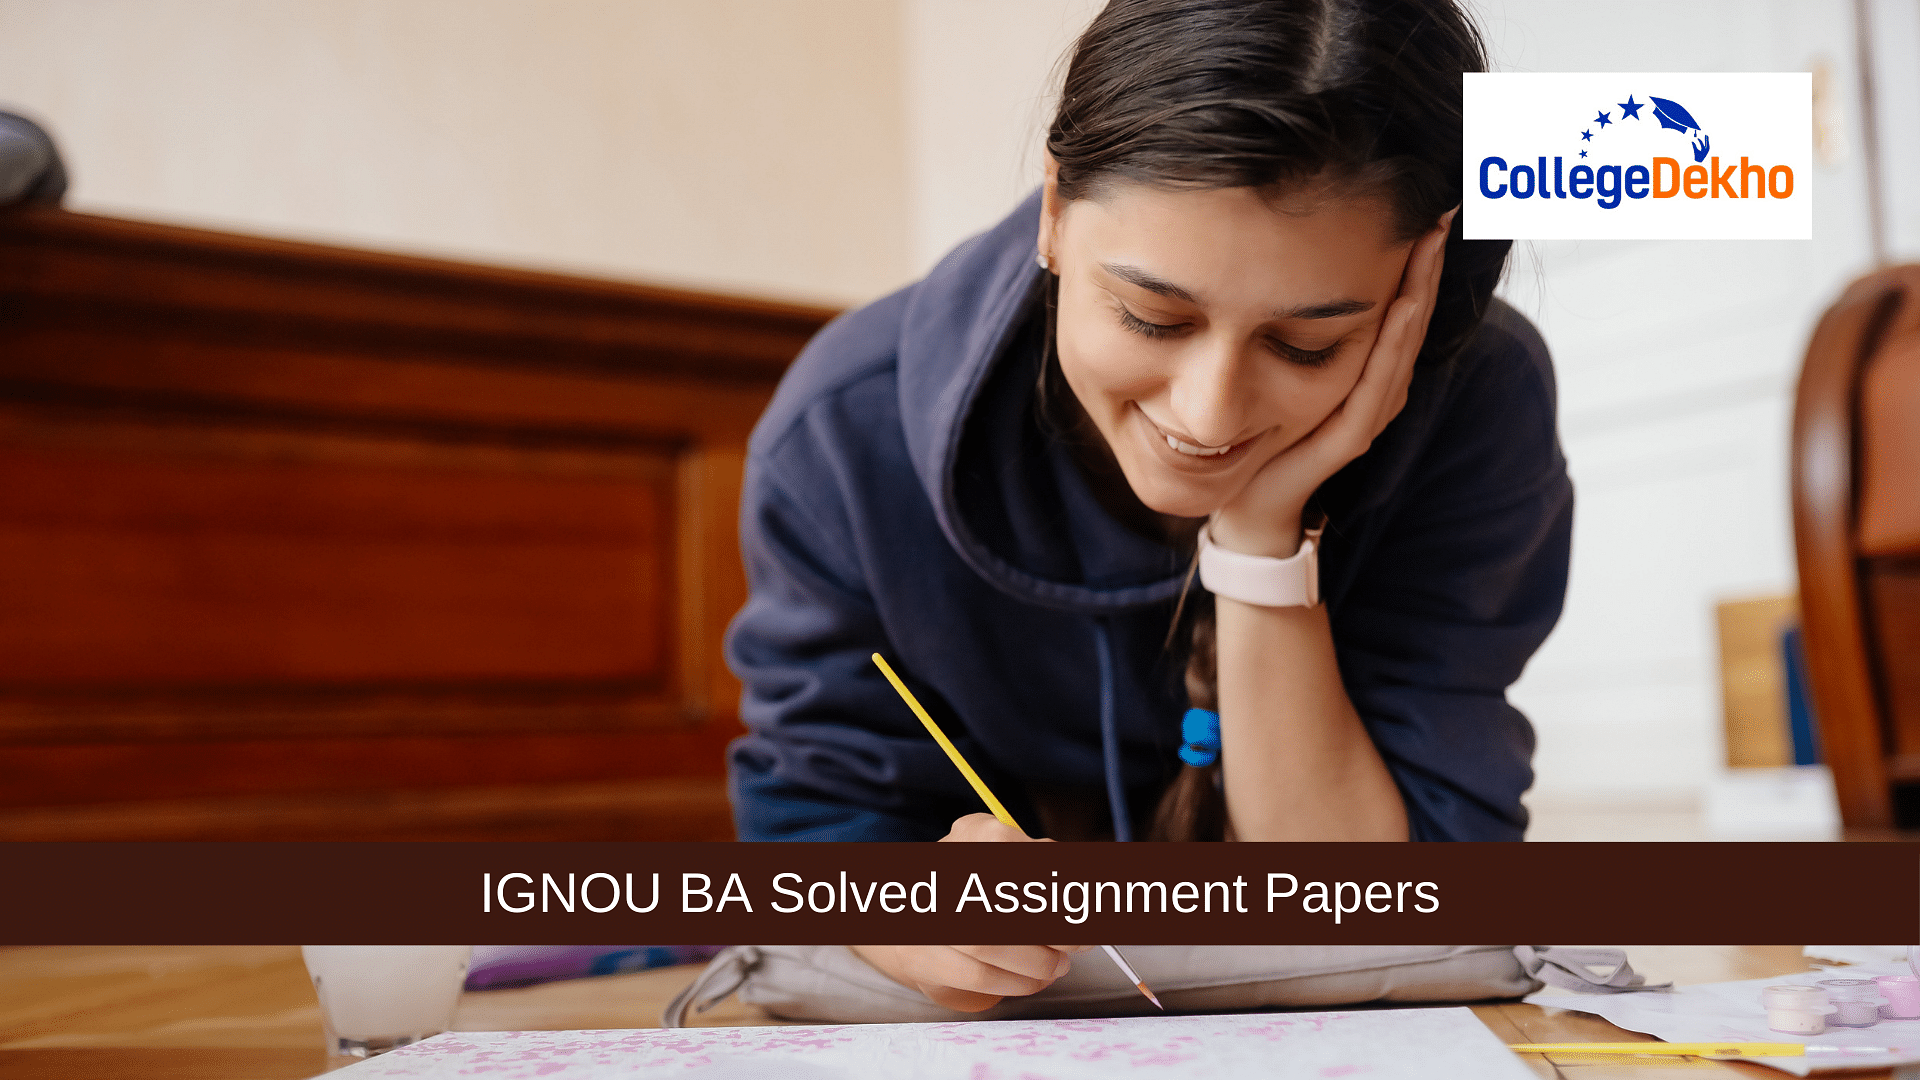 IGNOU OPENMAT Cutoff 2022: Check Qualifying Marks & Expected Cut offs